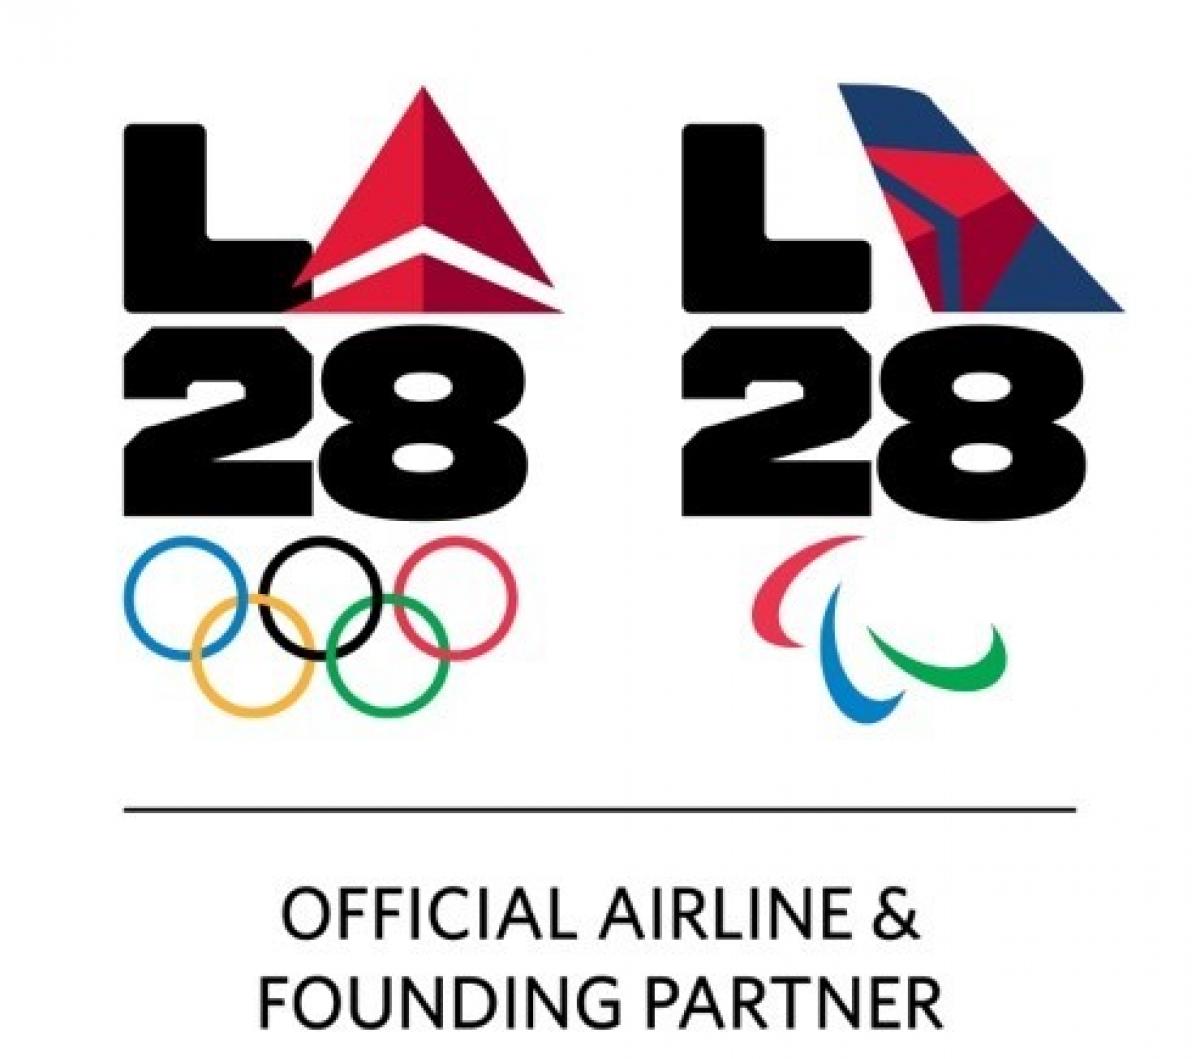 Emblems of the LA28 Olympic and Paralympic Games integrated with the logos of Delta Air Lines